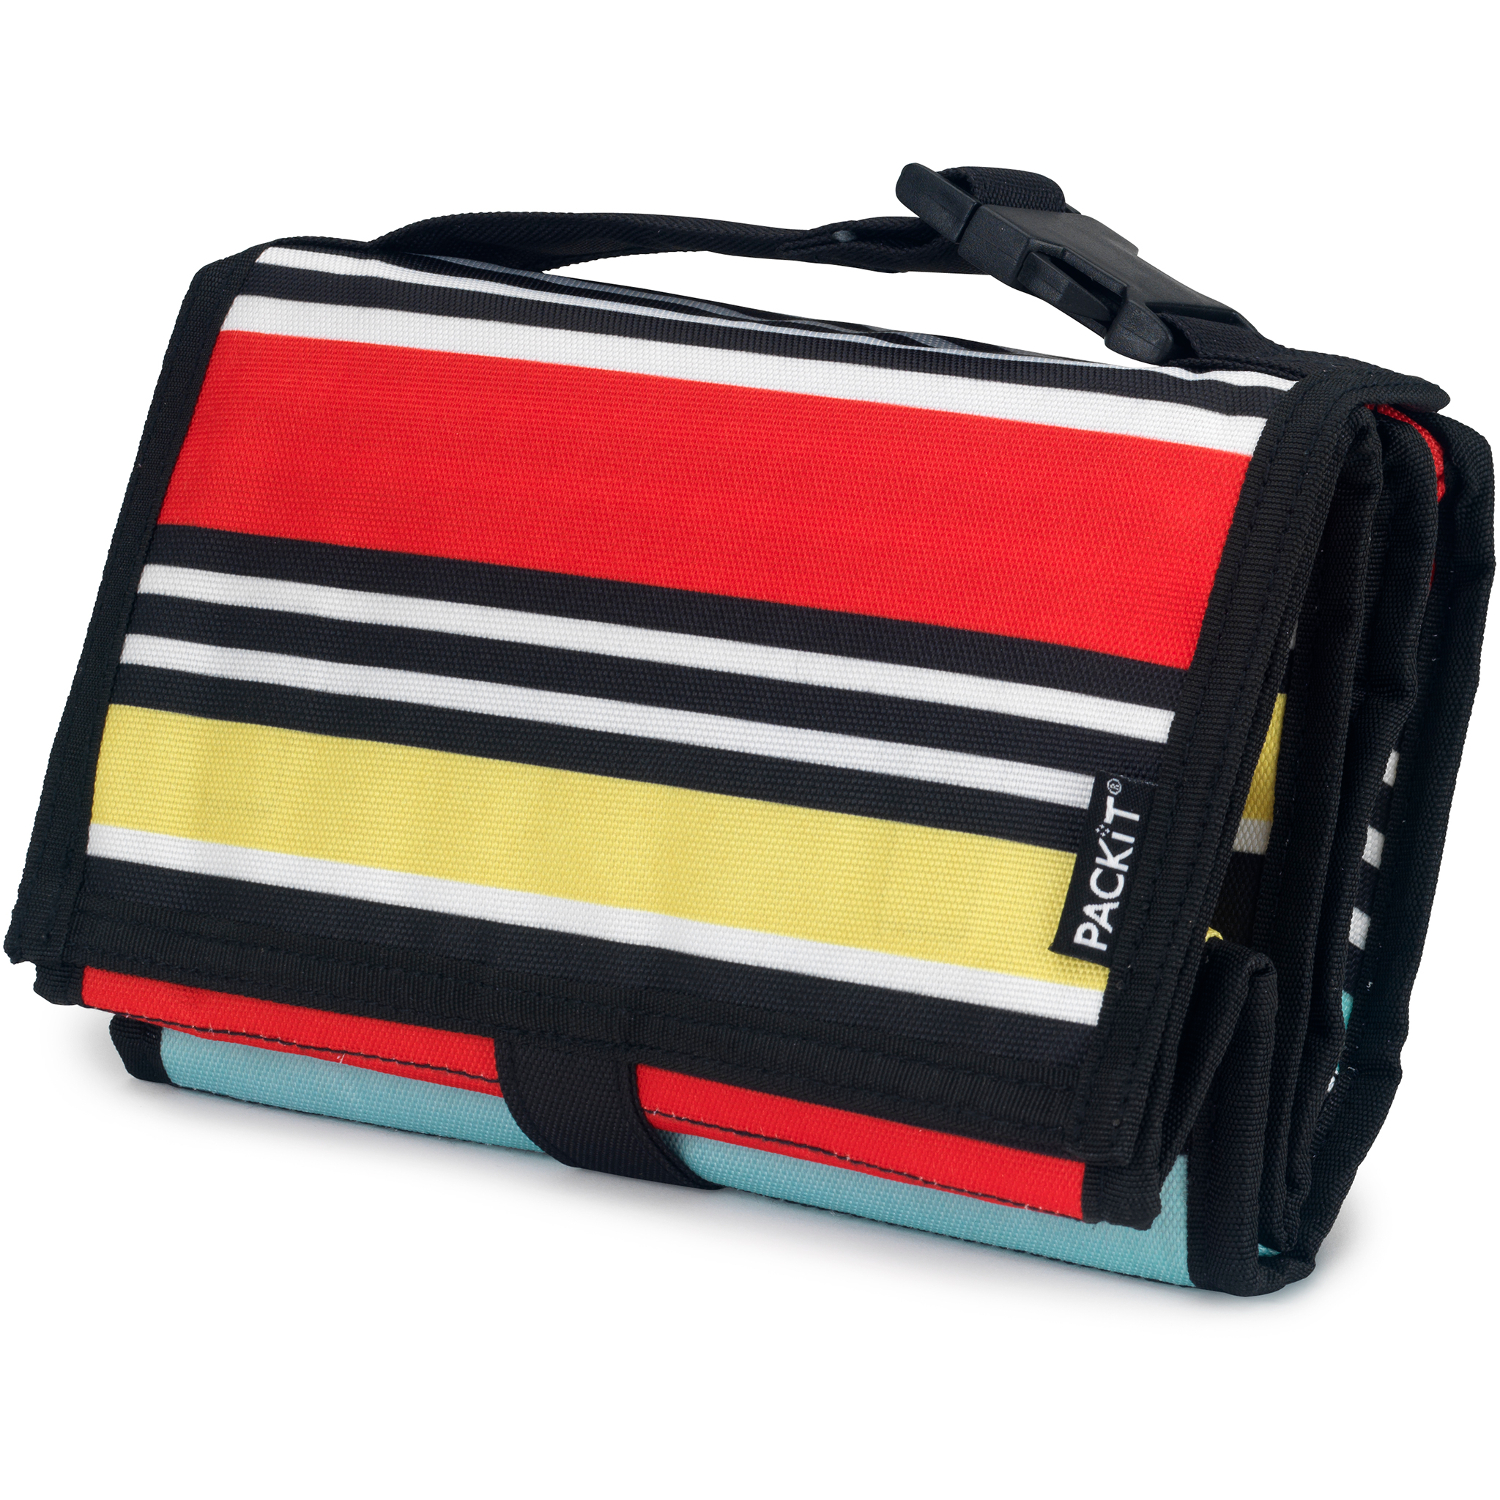     Lunch bag Surf Stripe, 4.4  (PACKiT PACKIT0029)